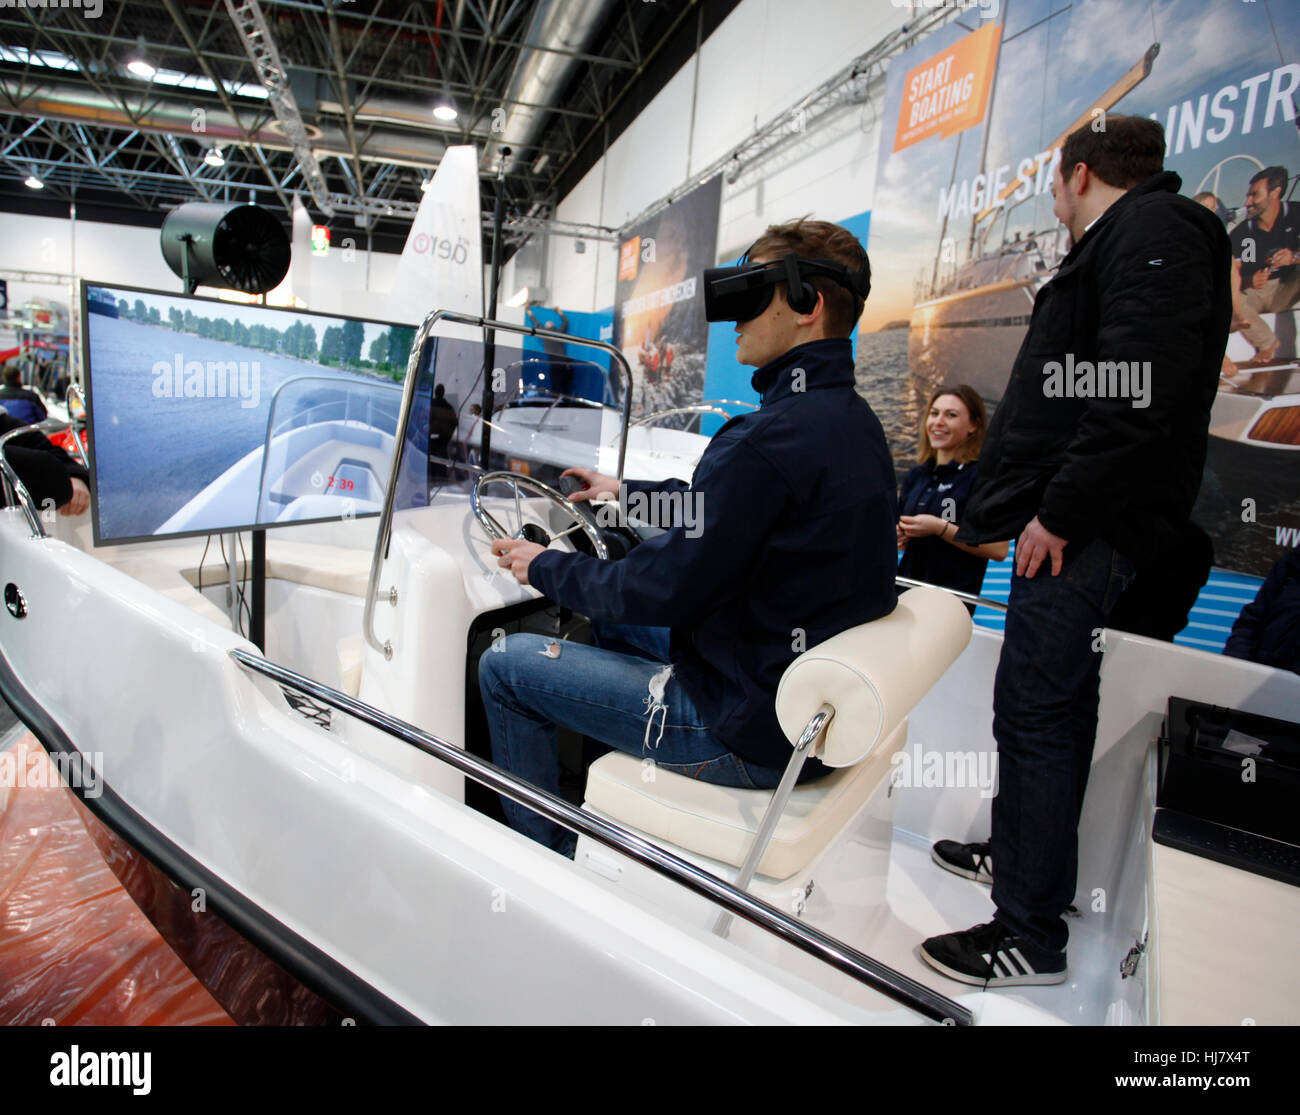 boot Duesseldorf 2017, the worlds biggest yachting and water sports exhibition. Boat computer game simulates the Virtual Reality Stock Photo